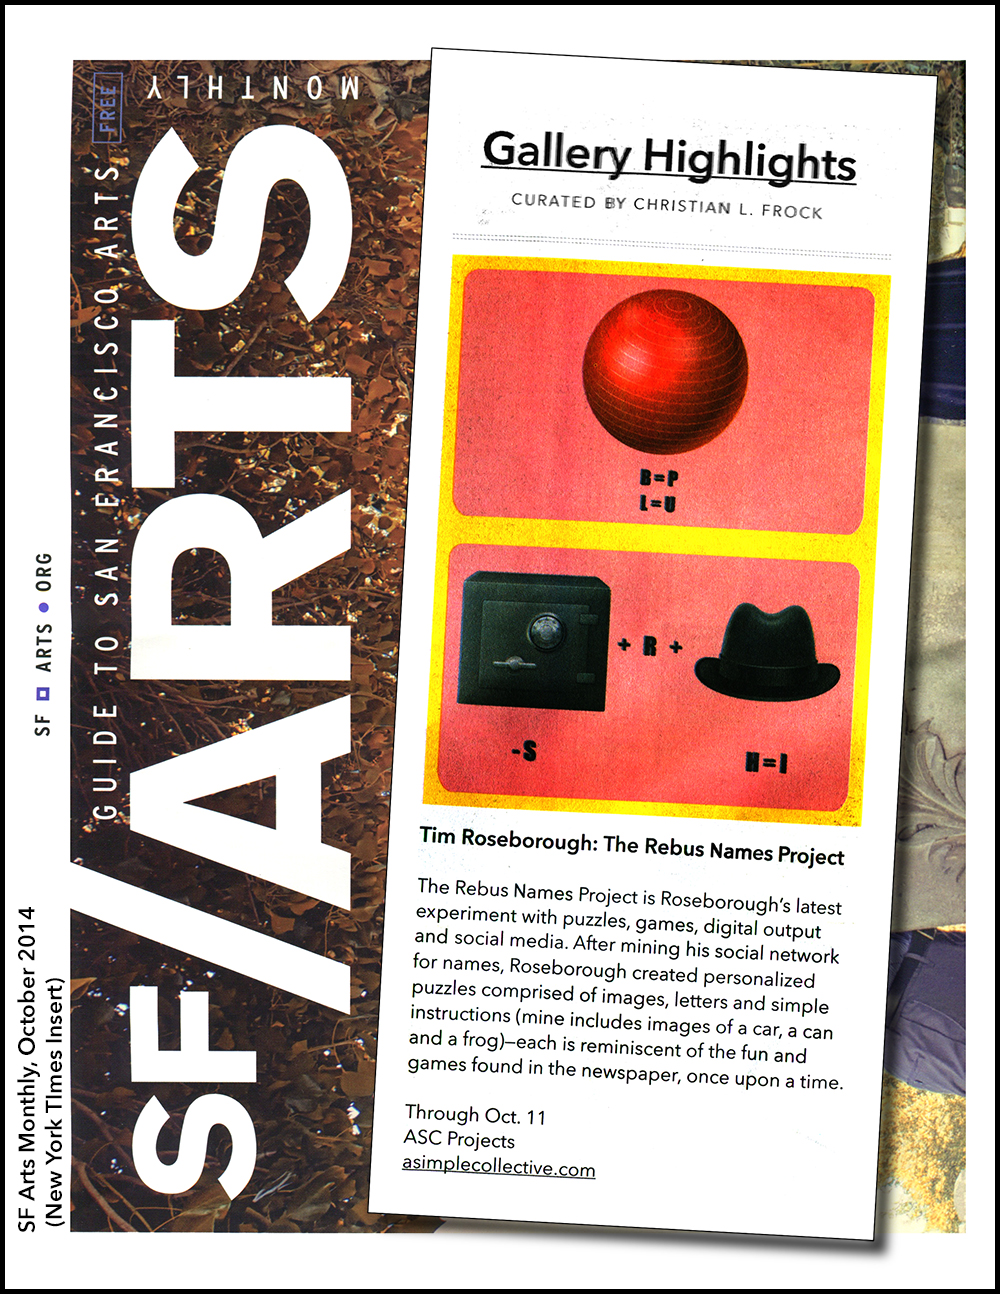 San Francisco Arts Monthly, October, 2014